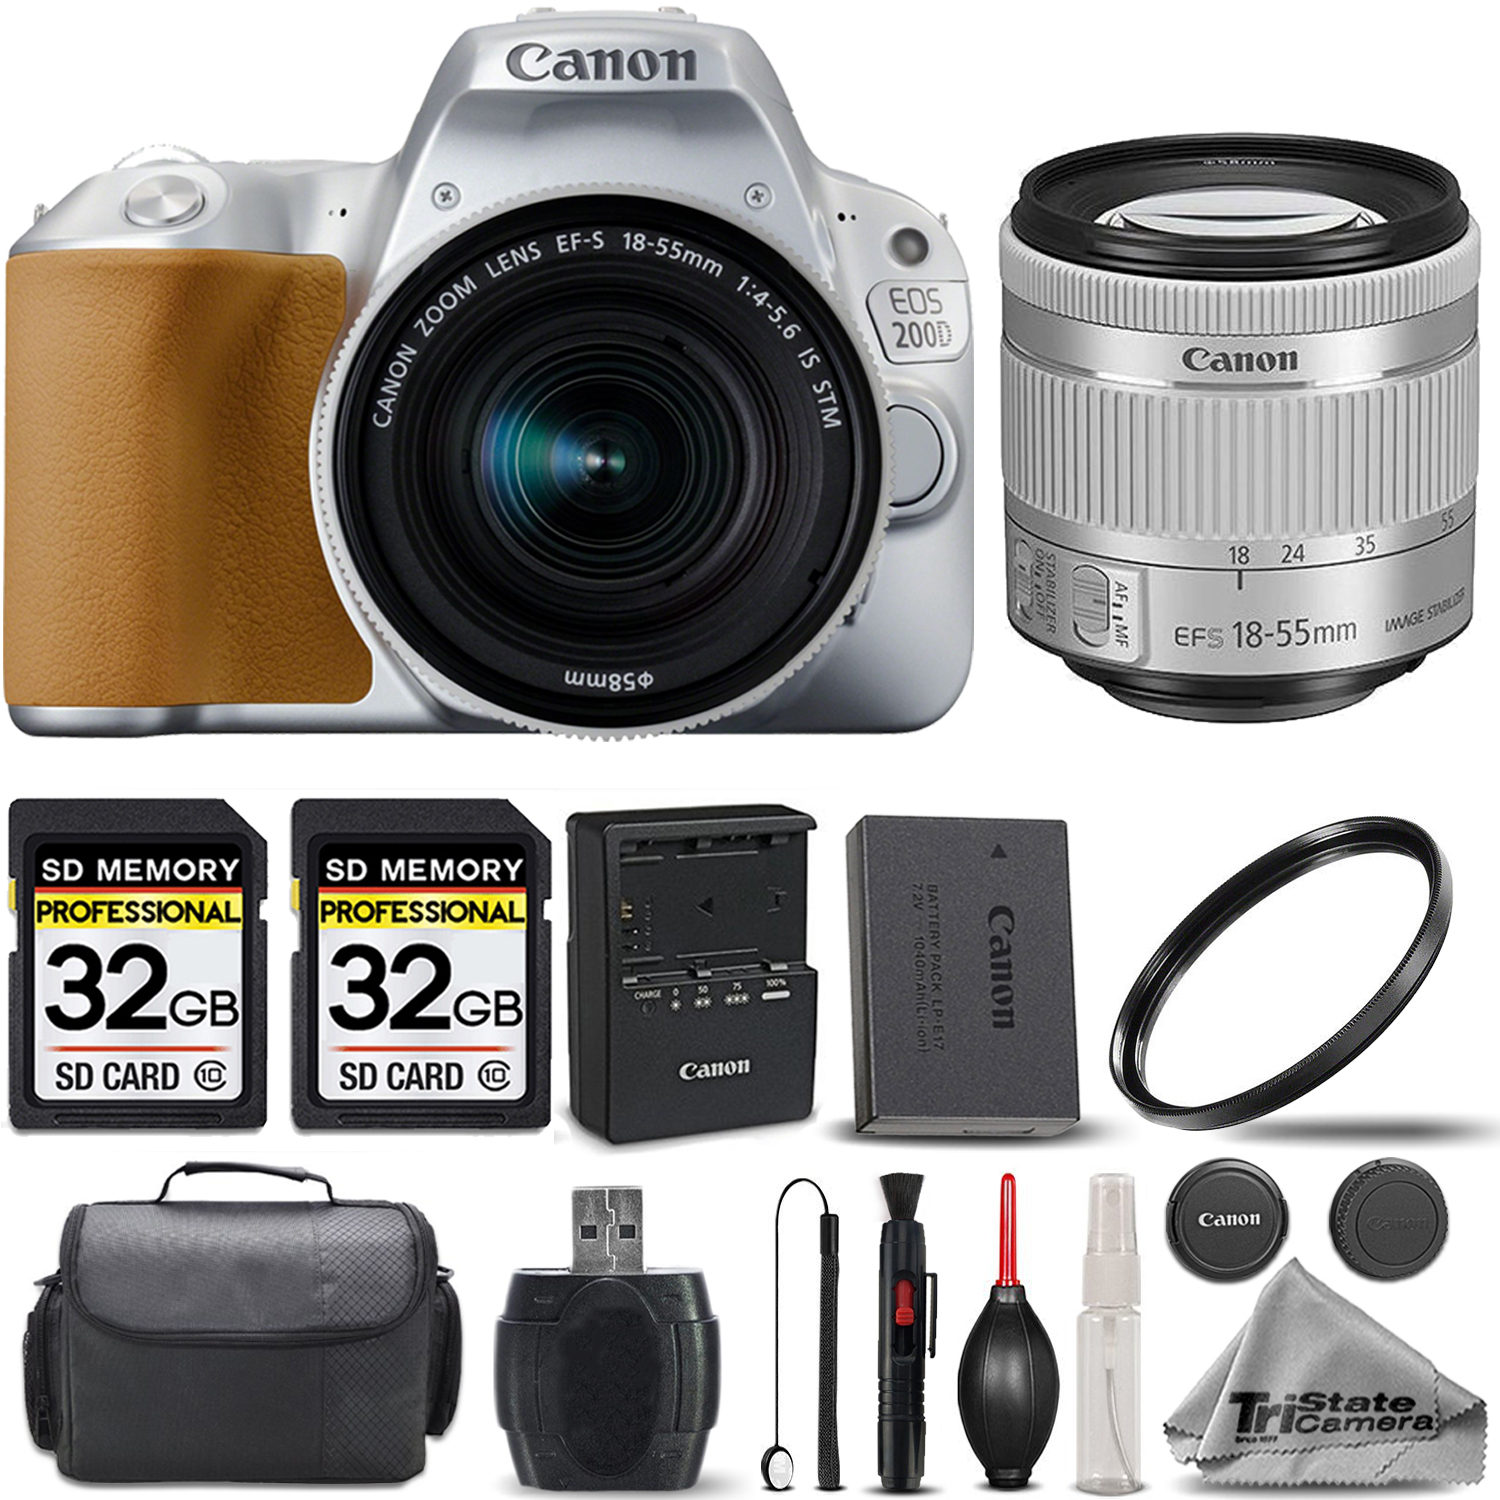 EOS Rebel 200D Camera(Silver) + 18-55mm STM Lens + 64GB -Basic Accessory Kit *FREE SHIPPING*